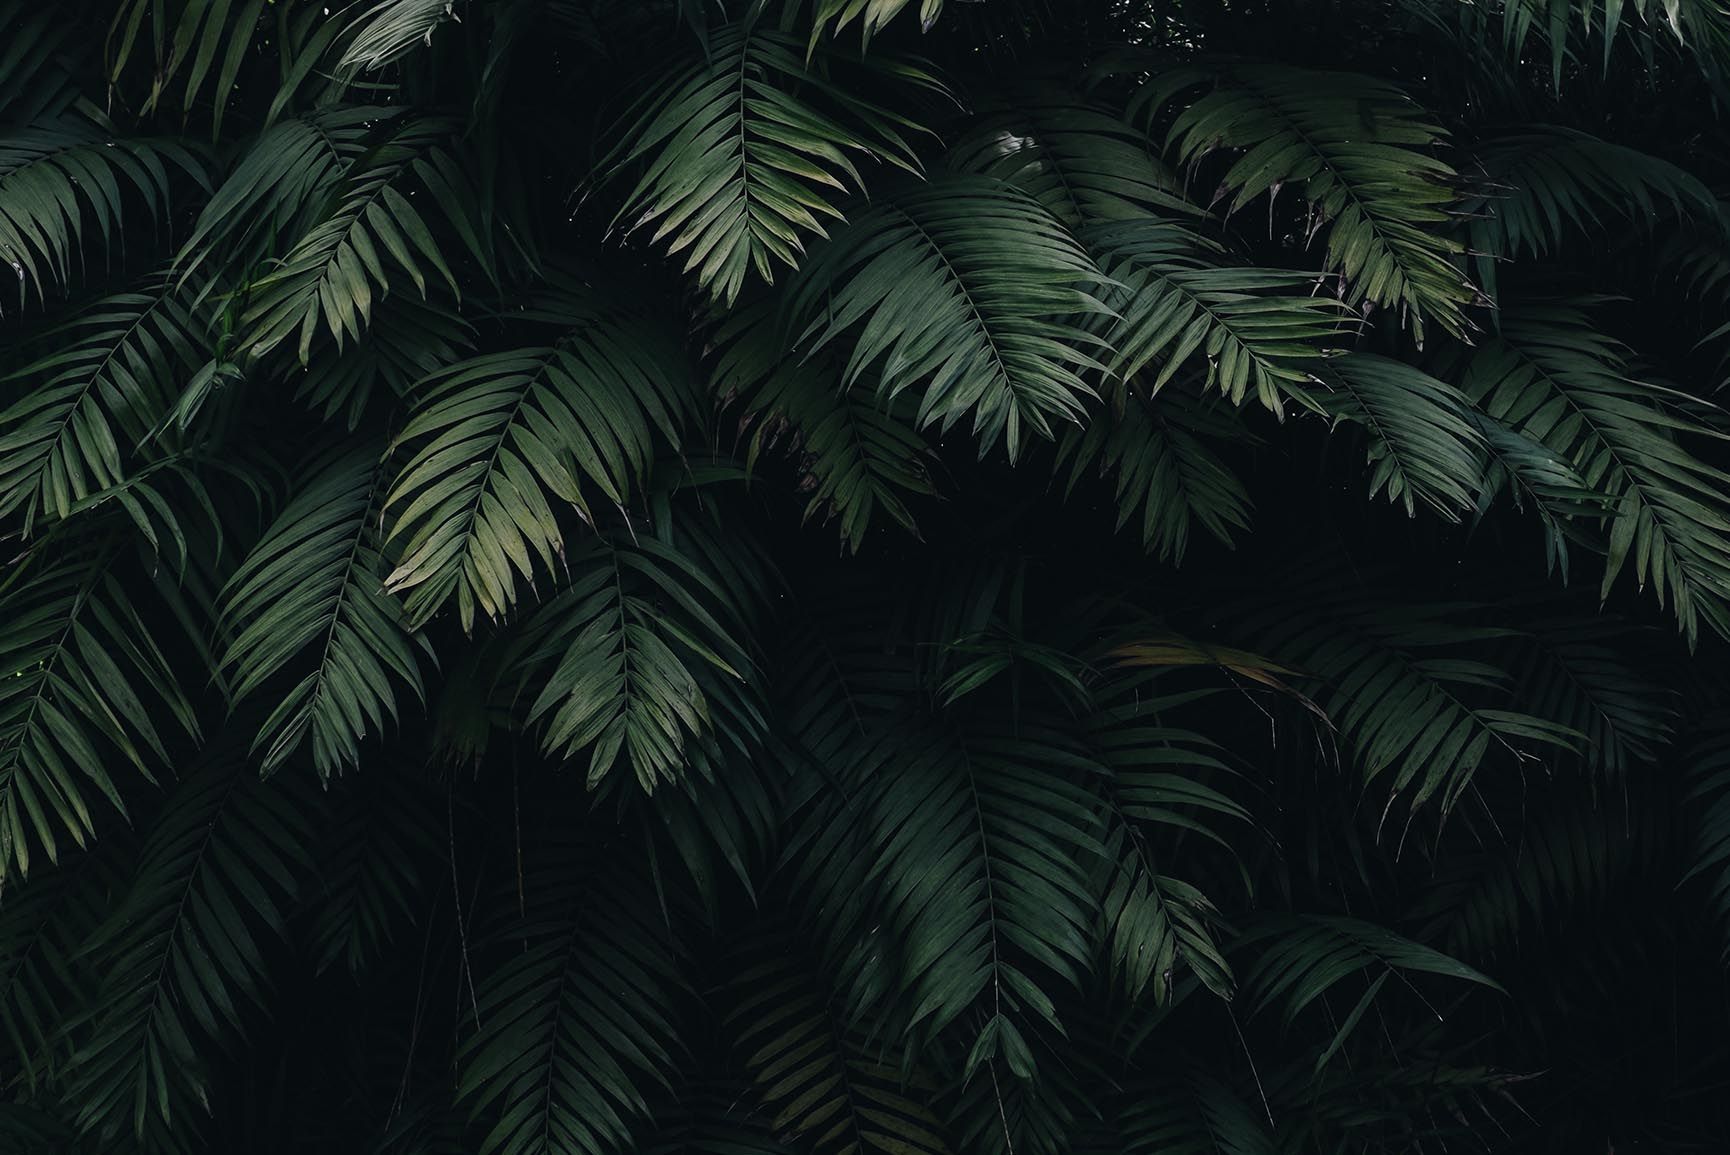 A close up of palm leaves - Jungle, tropical